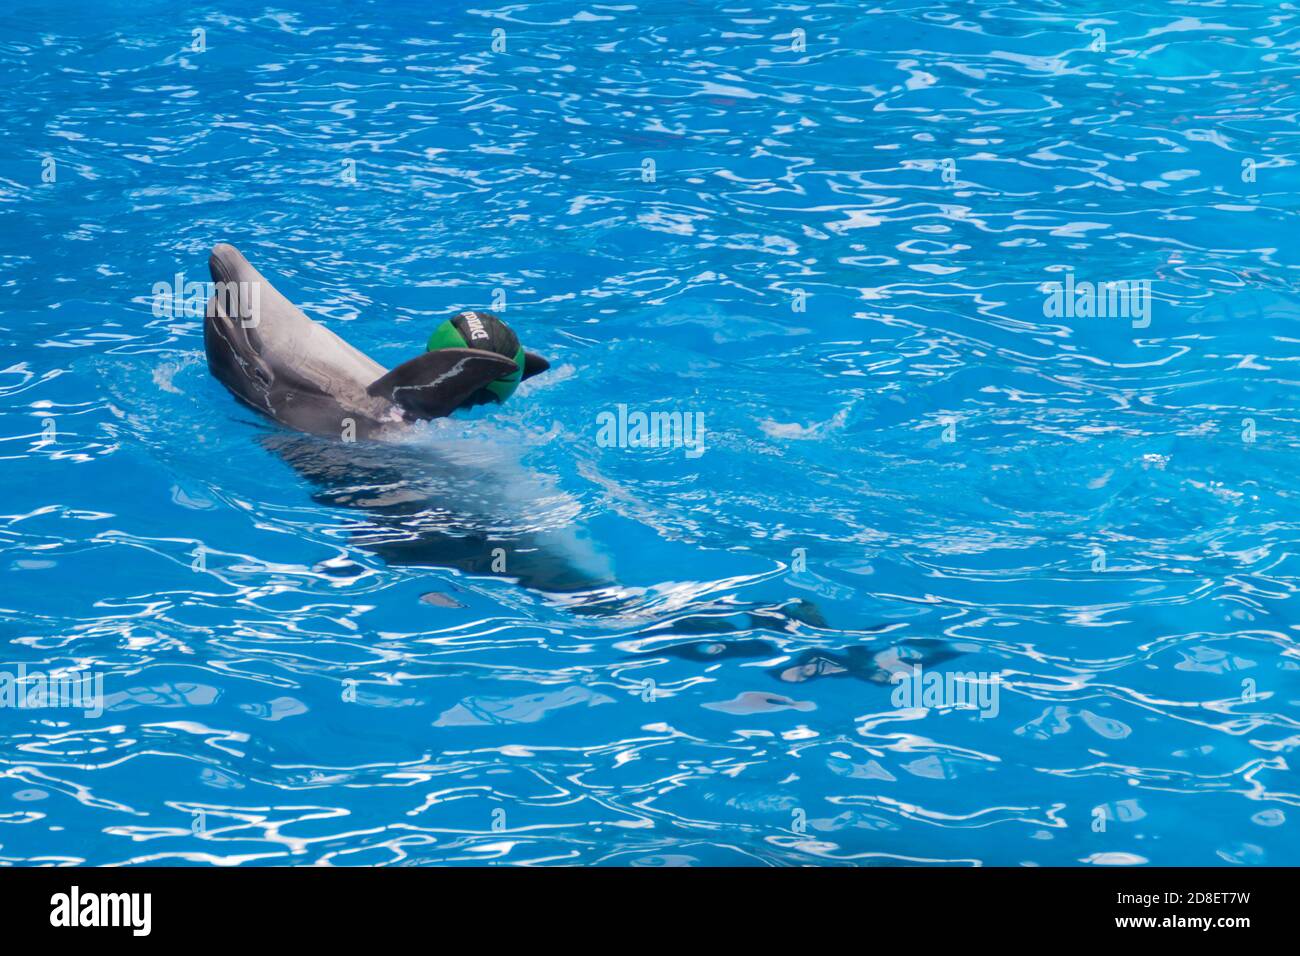 Cute gray dolphins swim in blue water. copy space, place for your text. bottlenose dolphins, wild marine mammals. blank for advertising swimming with dolphins, dolphinarium, shows, aquarium, Stock Photo